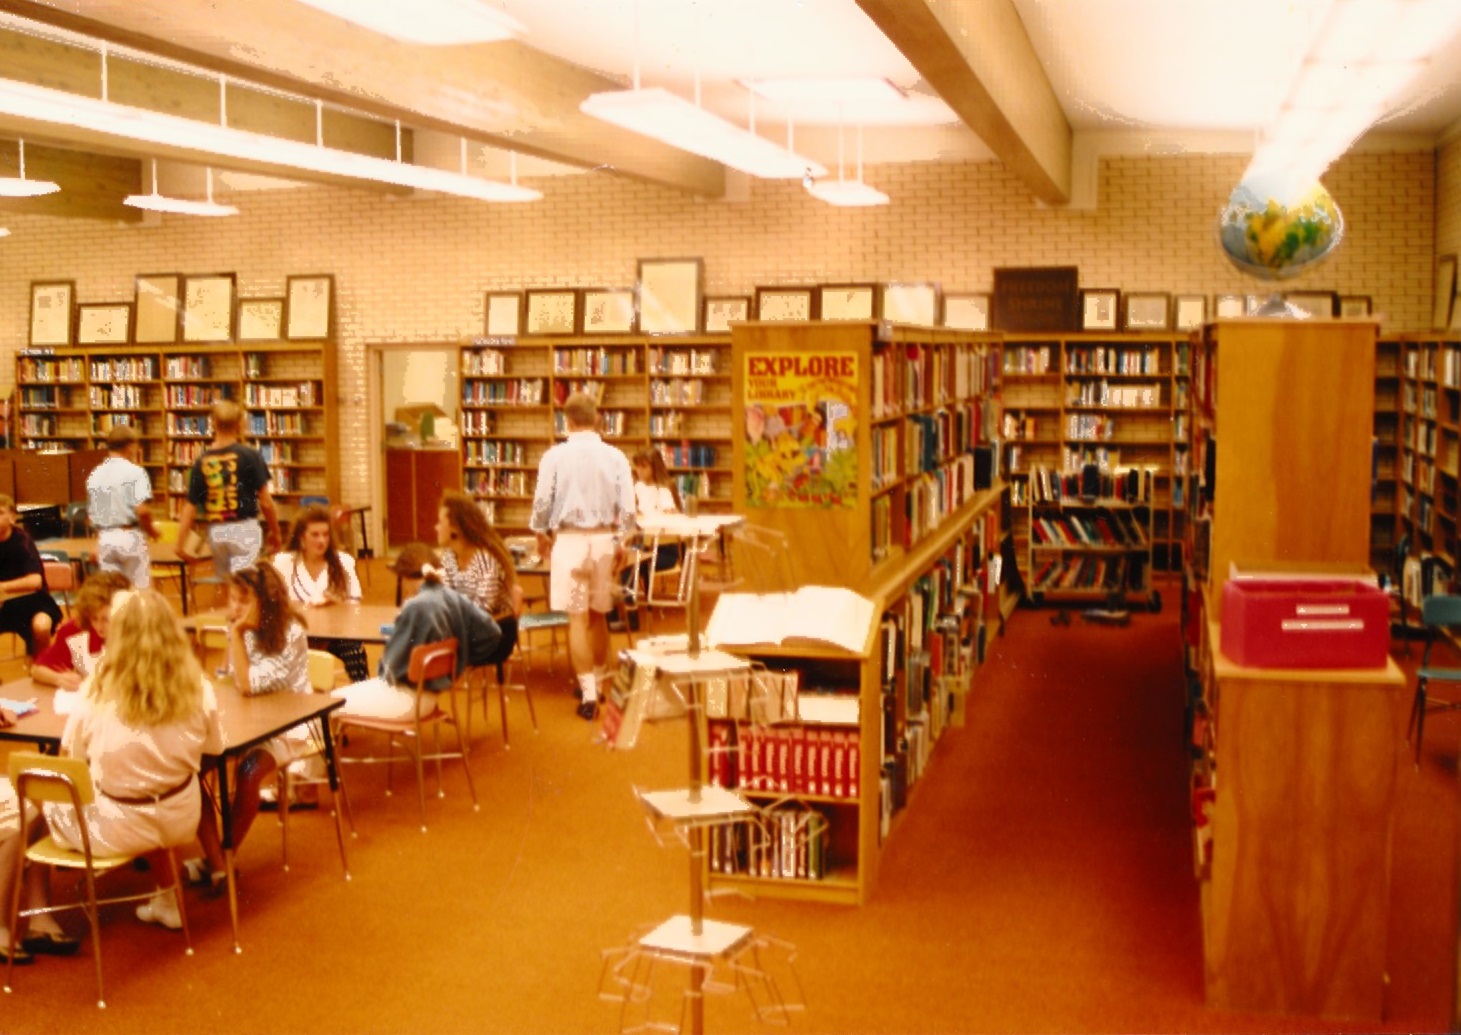 The library at Dixie High School